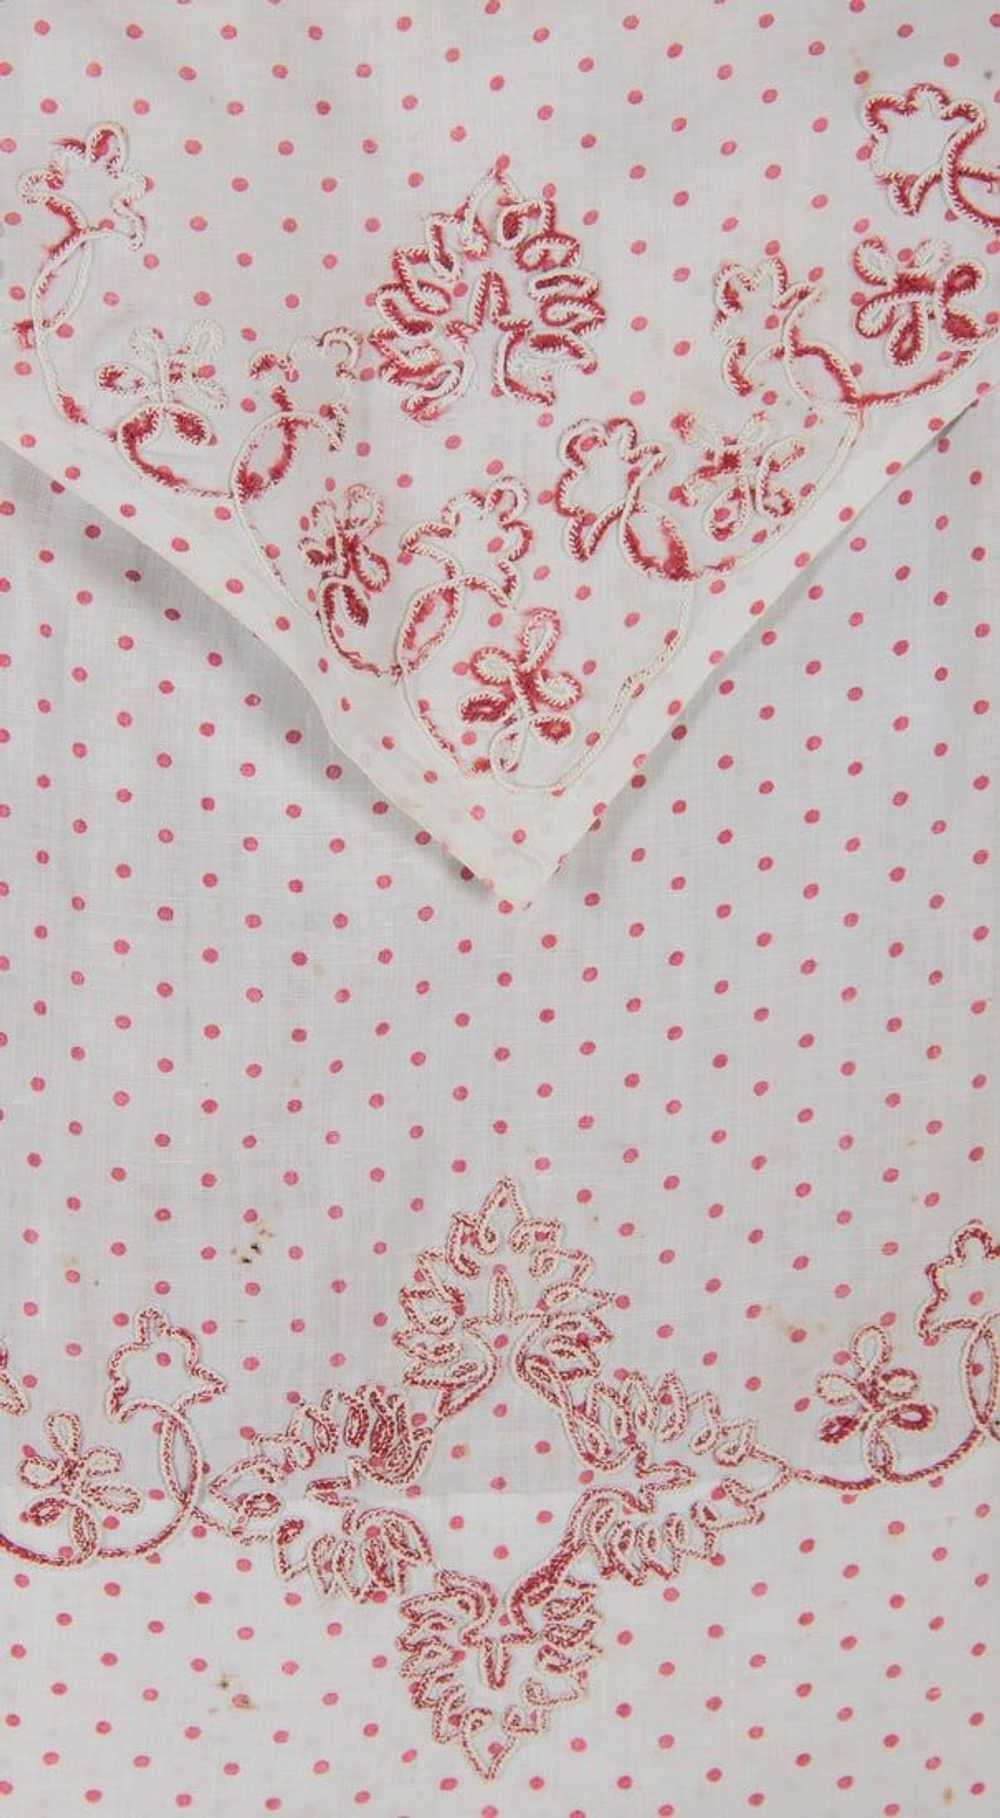 PRINTED COTTON & EMBROIDERED WOOL CHILDRENS DRESS… - image 10